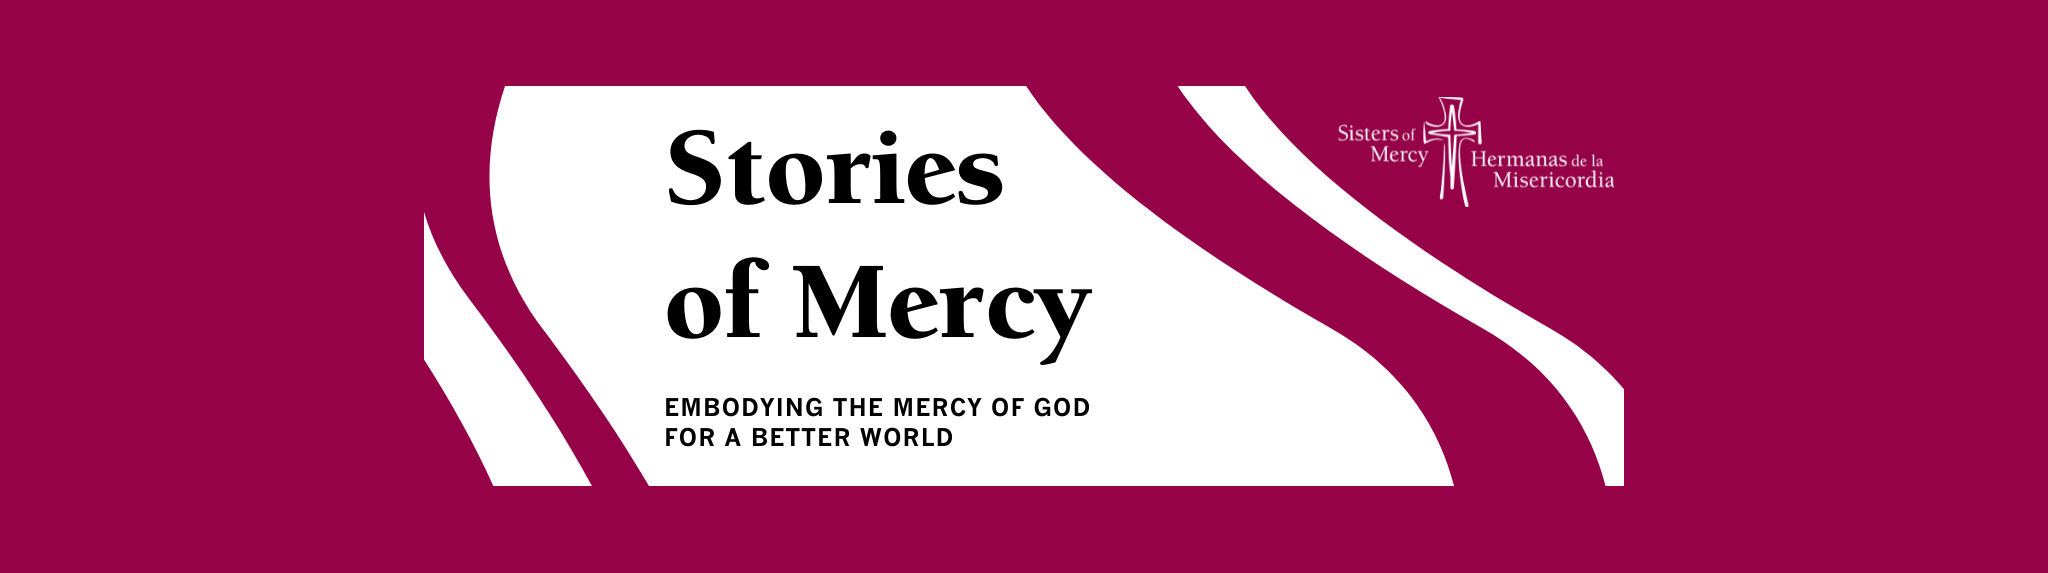 Stories of Mercy, Sisters of Mercy banner